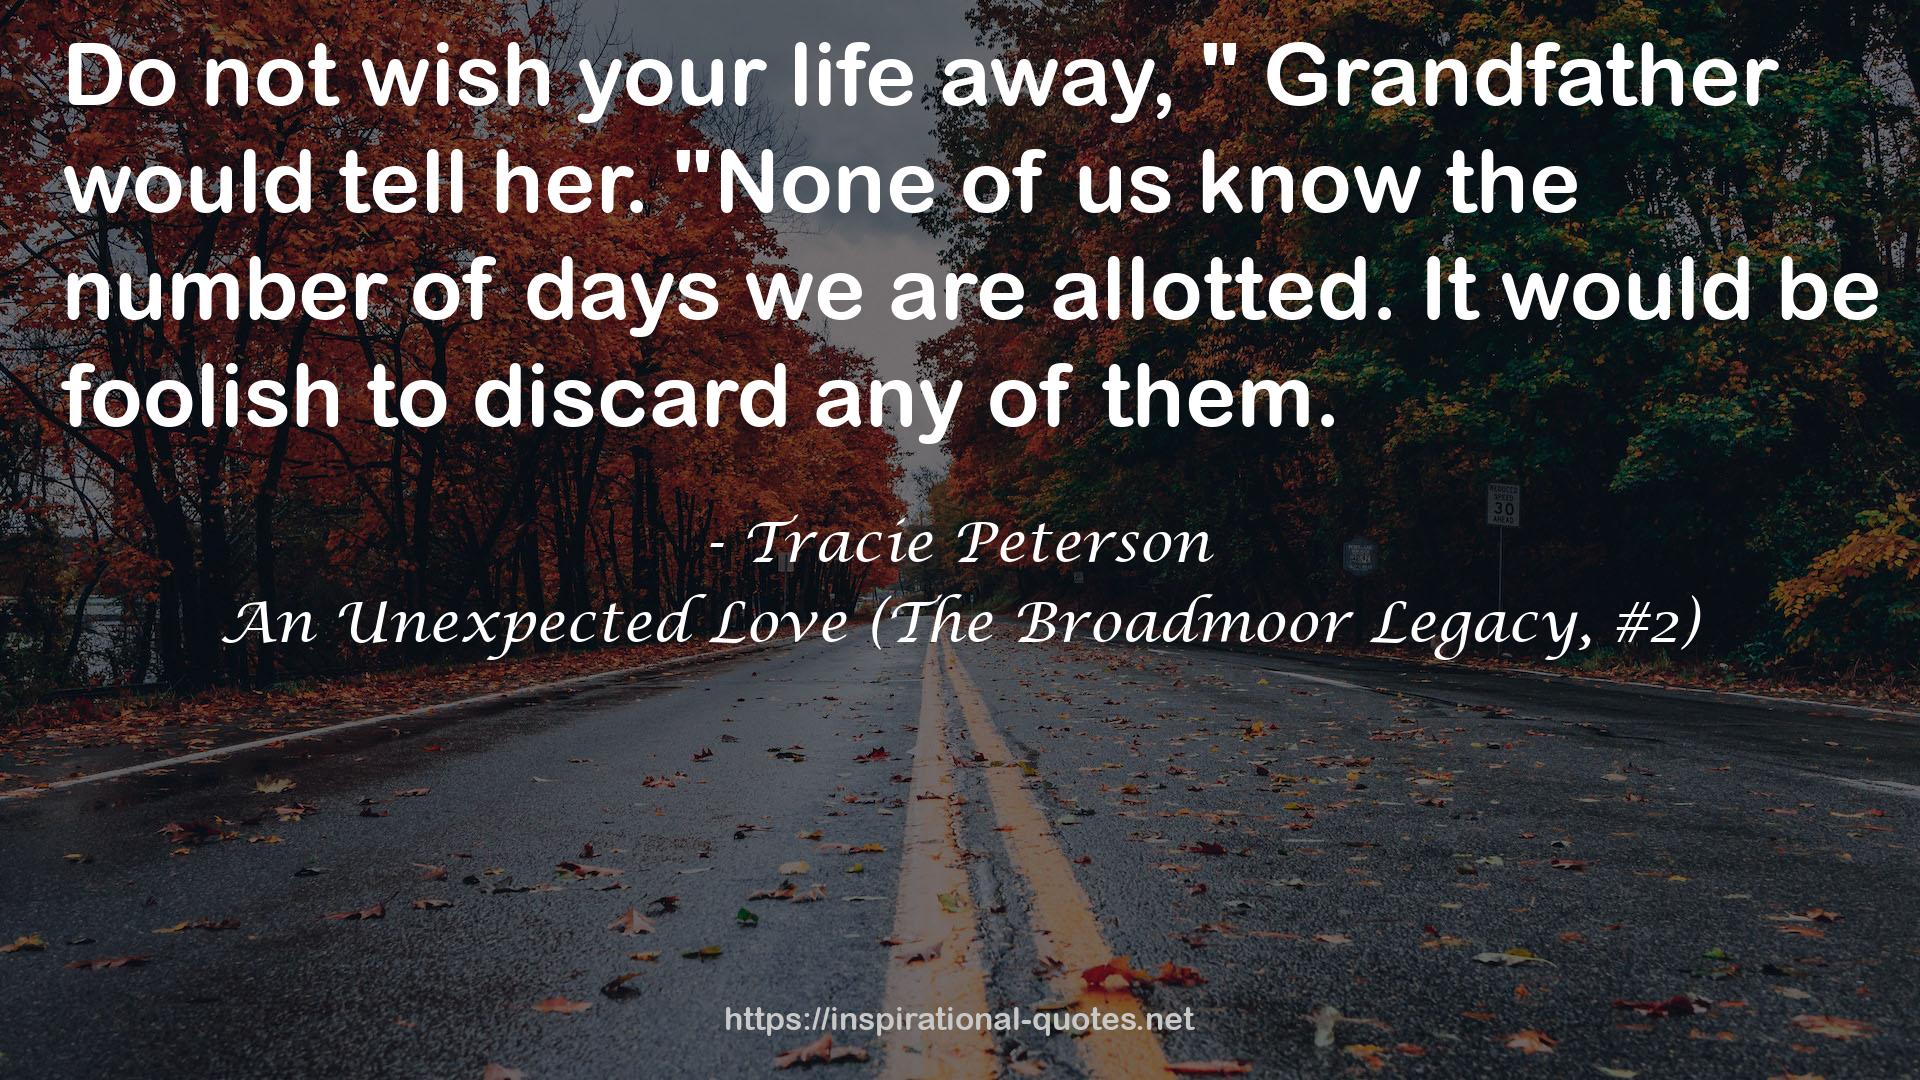 An Unexpected Love (The Broadmoor Legacy, #2) QUOTES